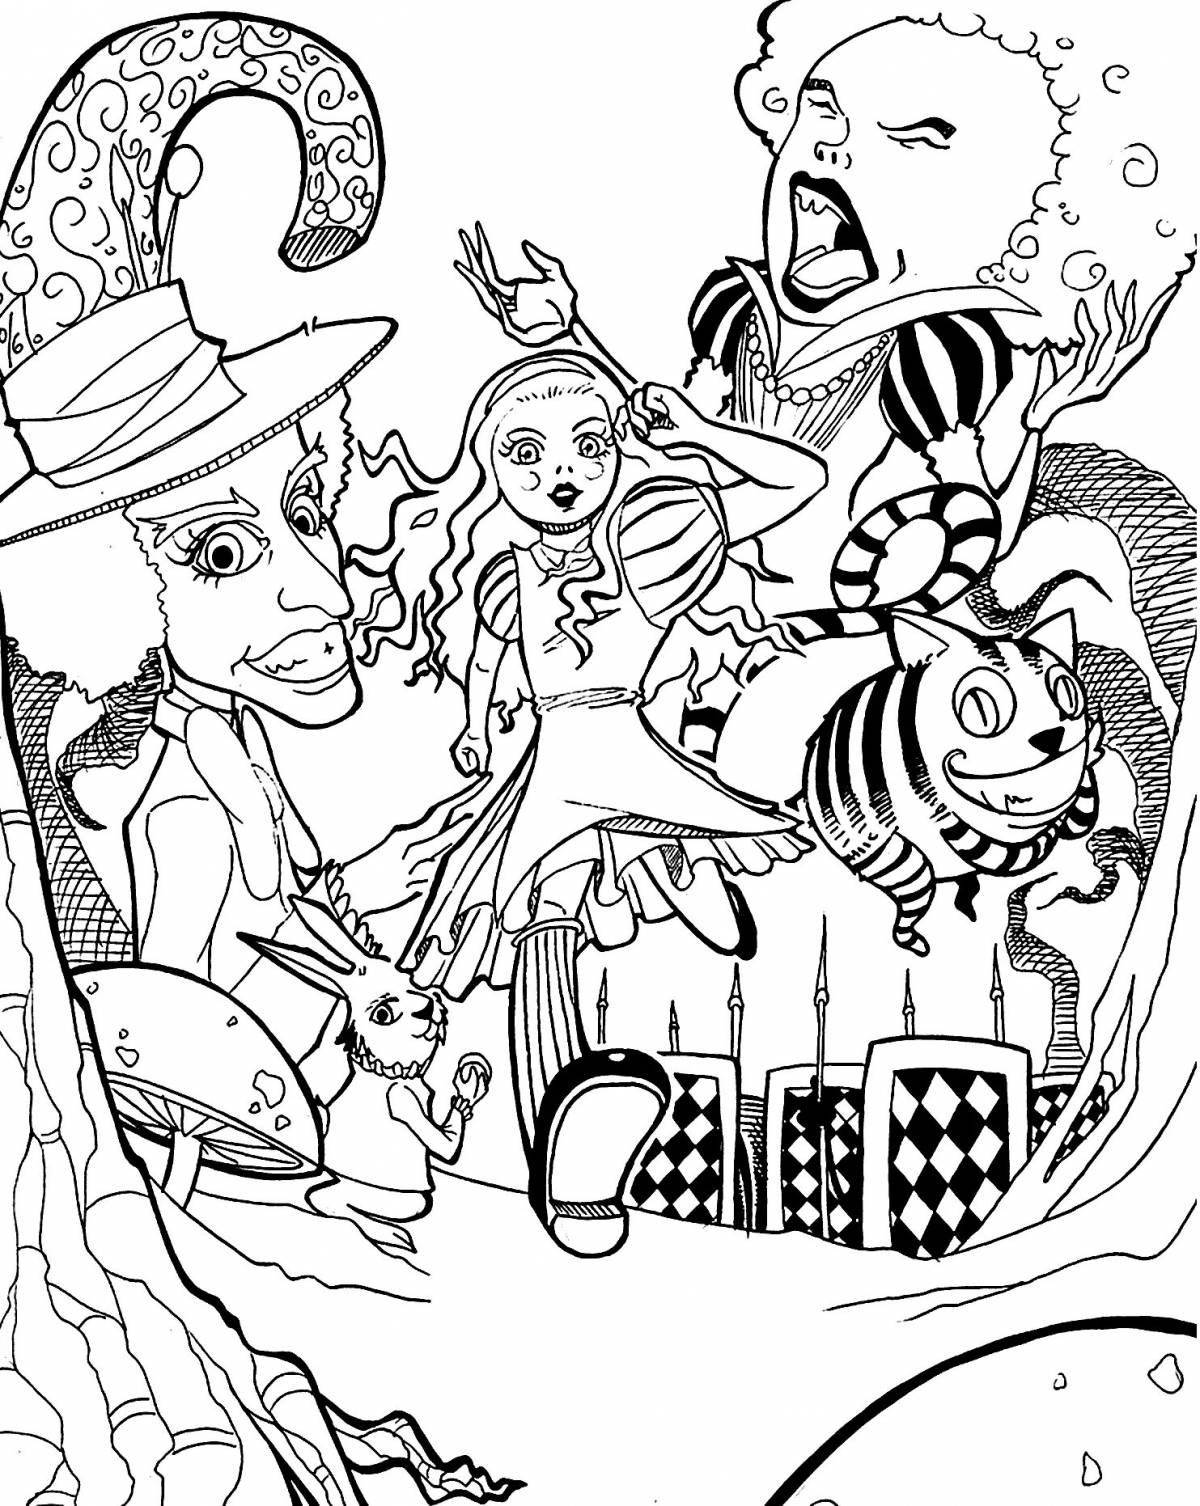 Gorgeous alice in wonderland coloring book